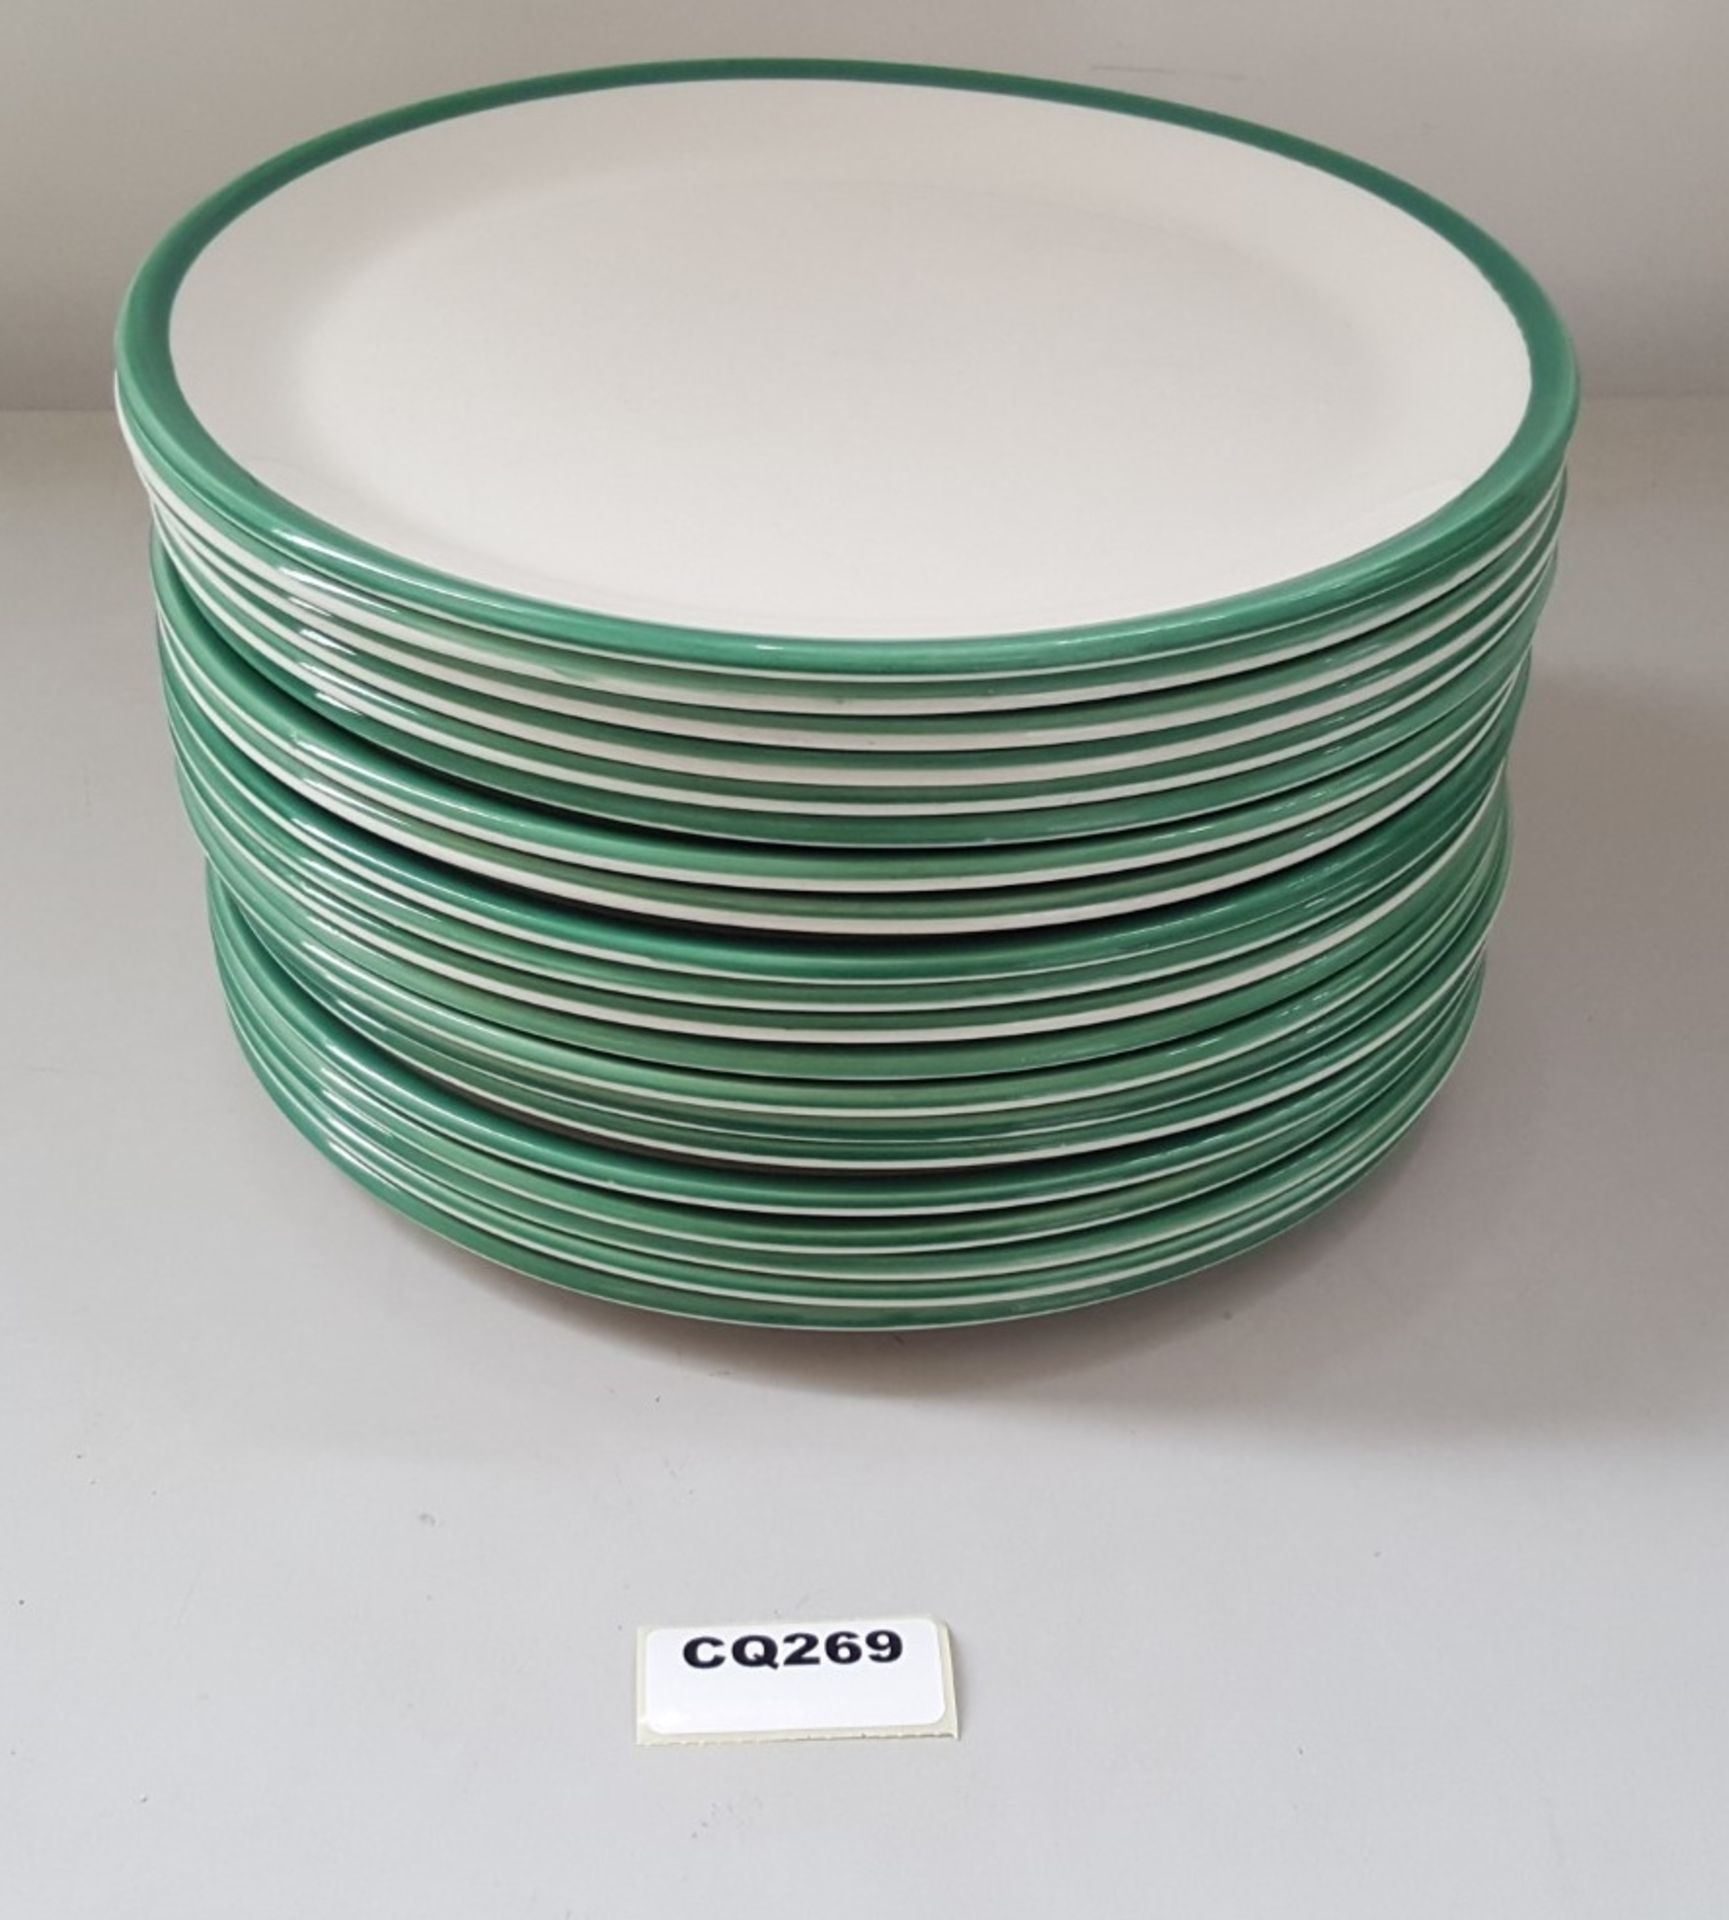 20 x Steelite Coupe Plates White With Green Outline Egde 27.5CM - Ref CQ269